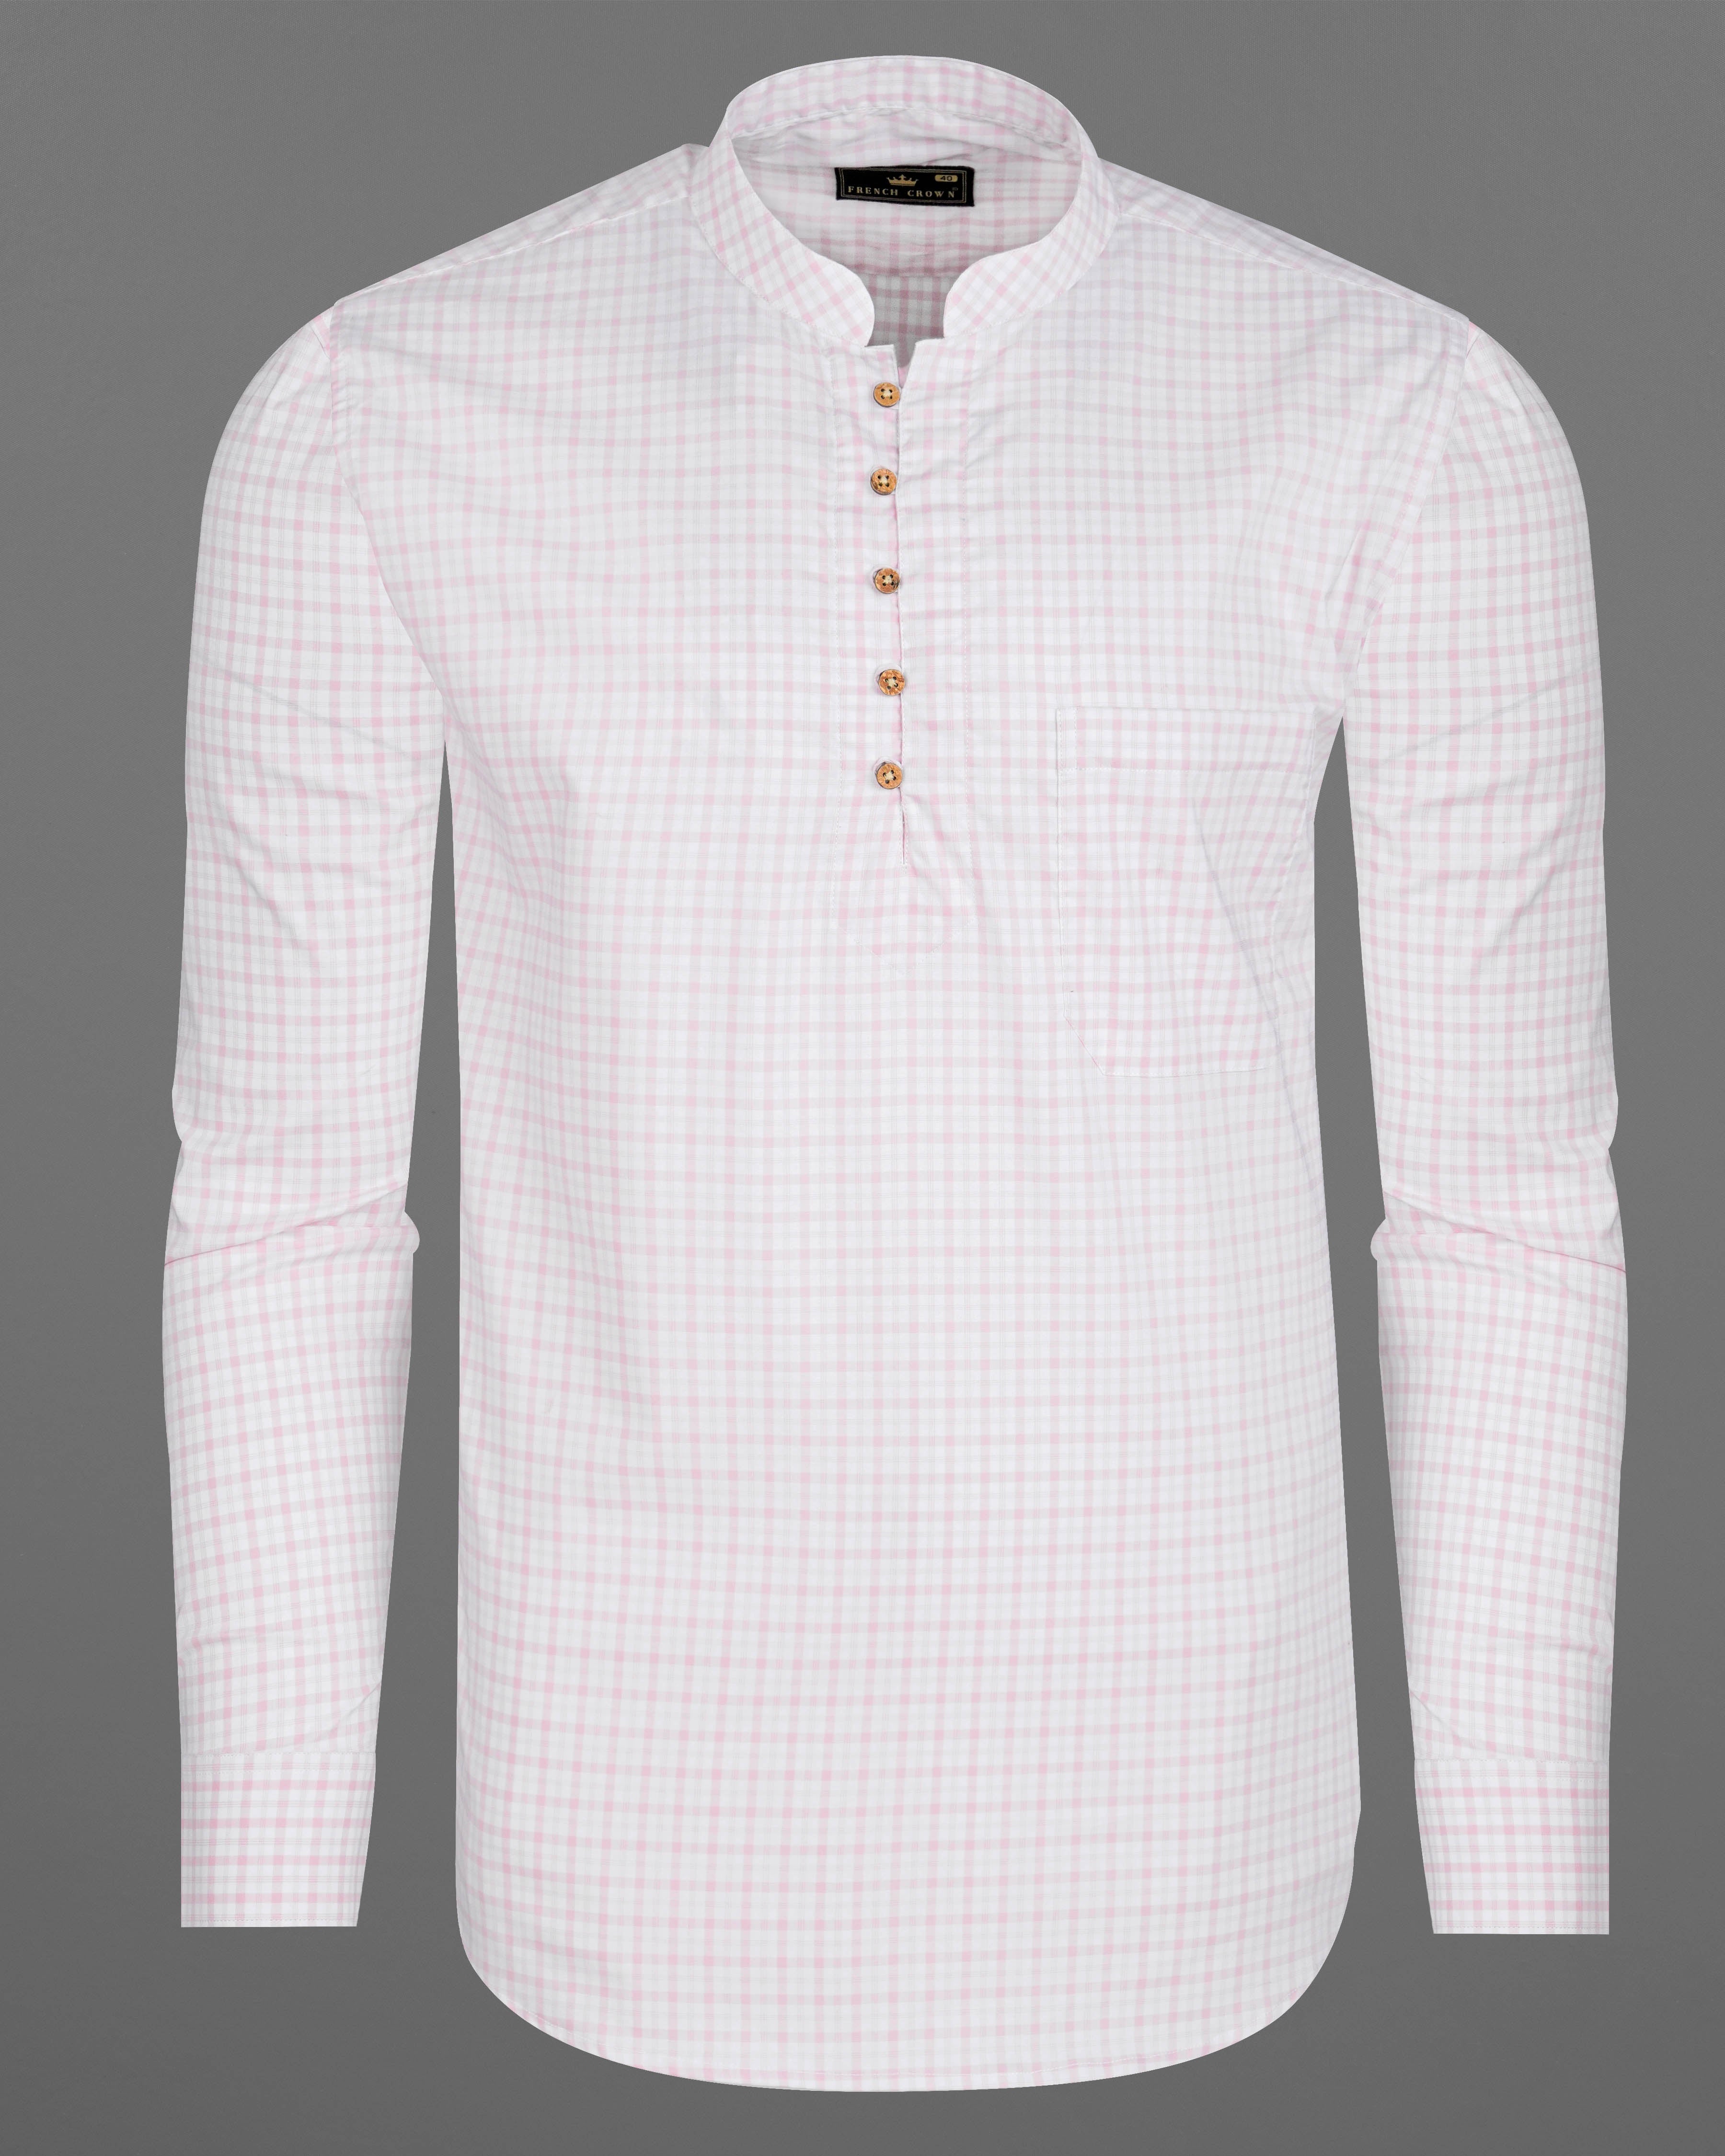 Bright White and Twilight Pink Checkered Premium Cotton Kurta Shirt 8148-KS-38, 8148-KS-H-38, 8148-KS-39, 8148-KS-H-39, 8148-KS-40, 8148-KS-H-40, 8148-KS-42, 8148-KS-H-42, 8148-KS-44, 8148-KS-H-44, 8148-KS-46, 8148-KS-H-46, 8148-KS-48, 8148-KS-H-48, 8148-KS-50, 8148-KS-H-50, 8148-KS-52, 8148-KS-H-52